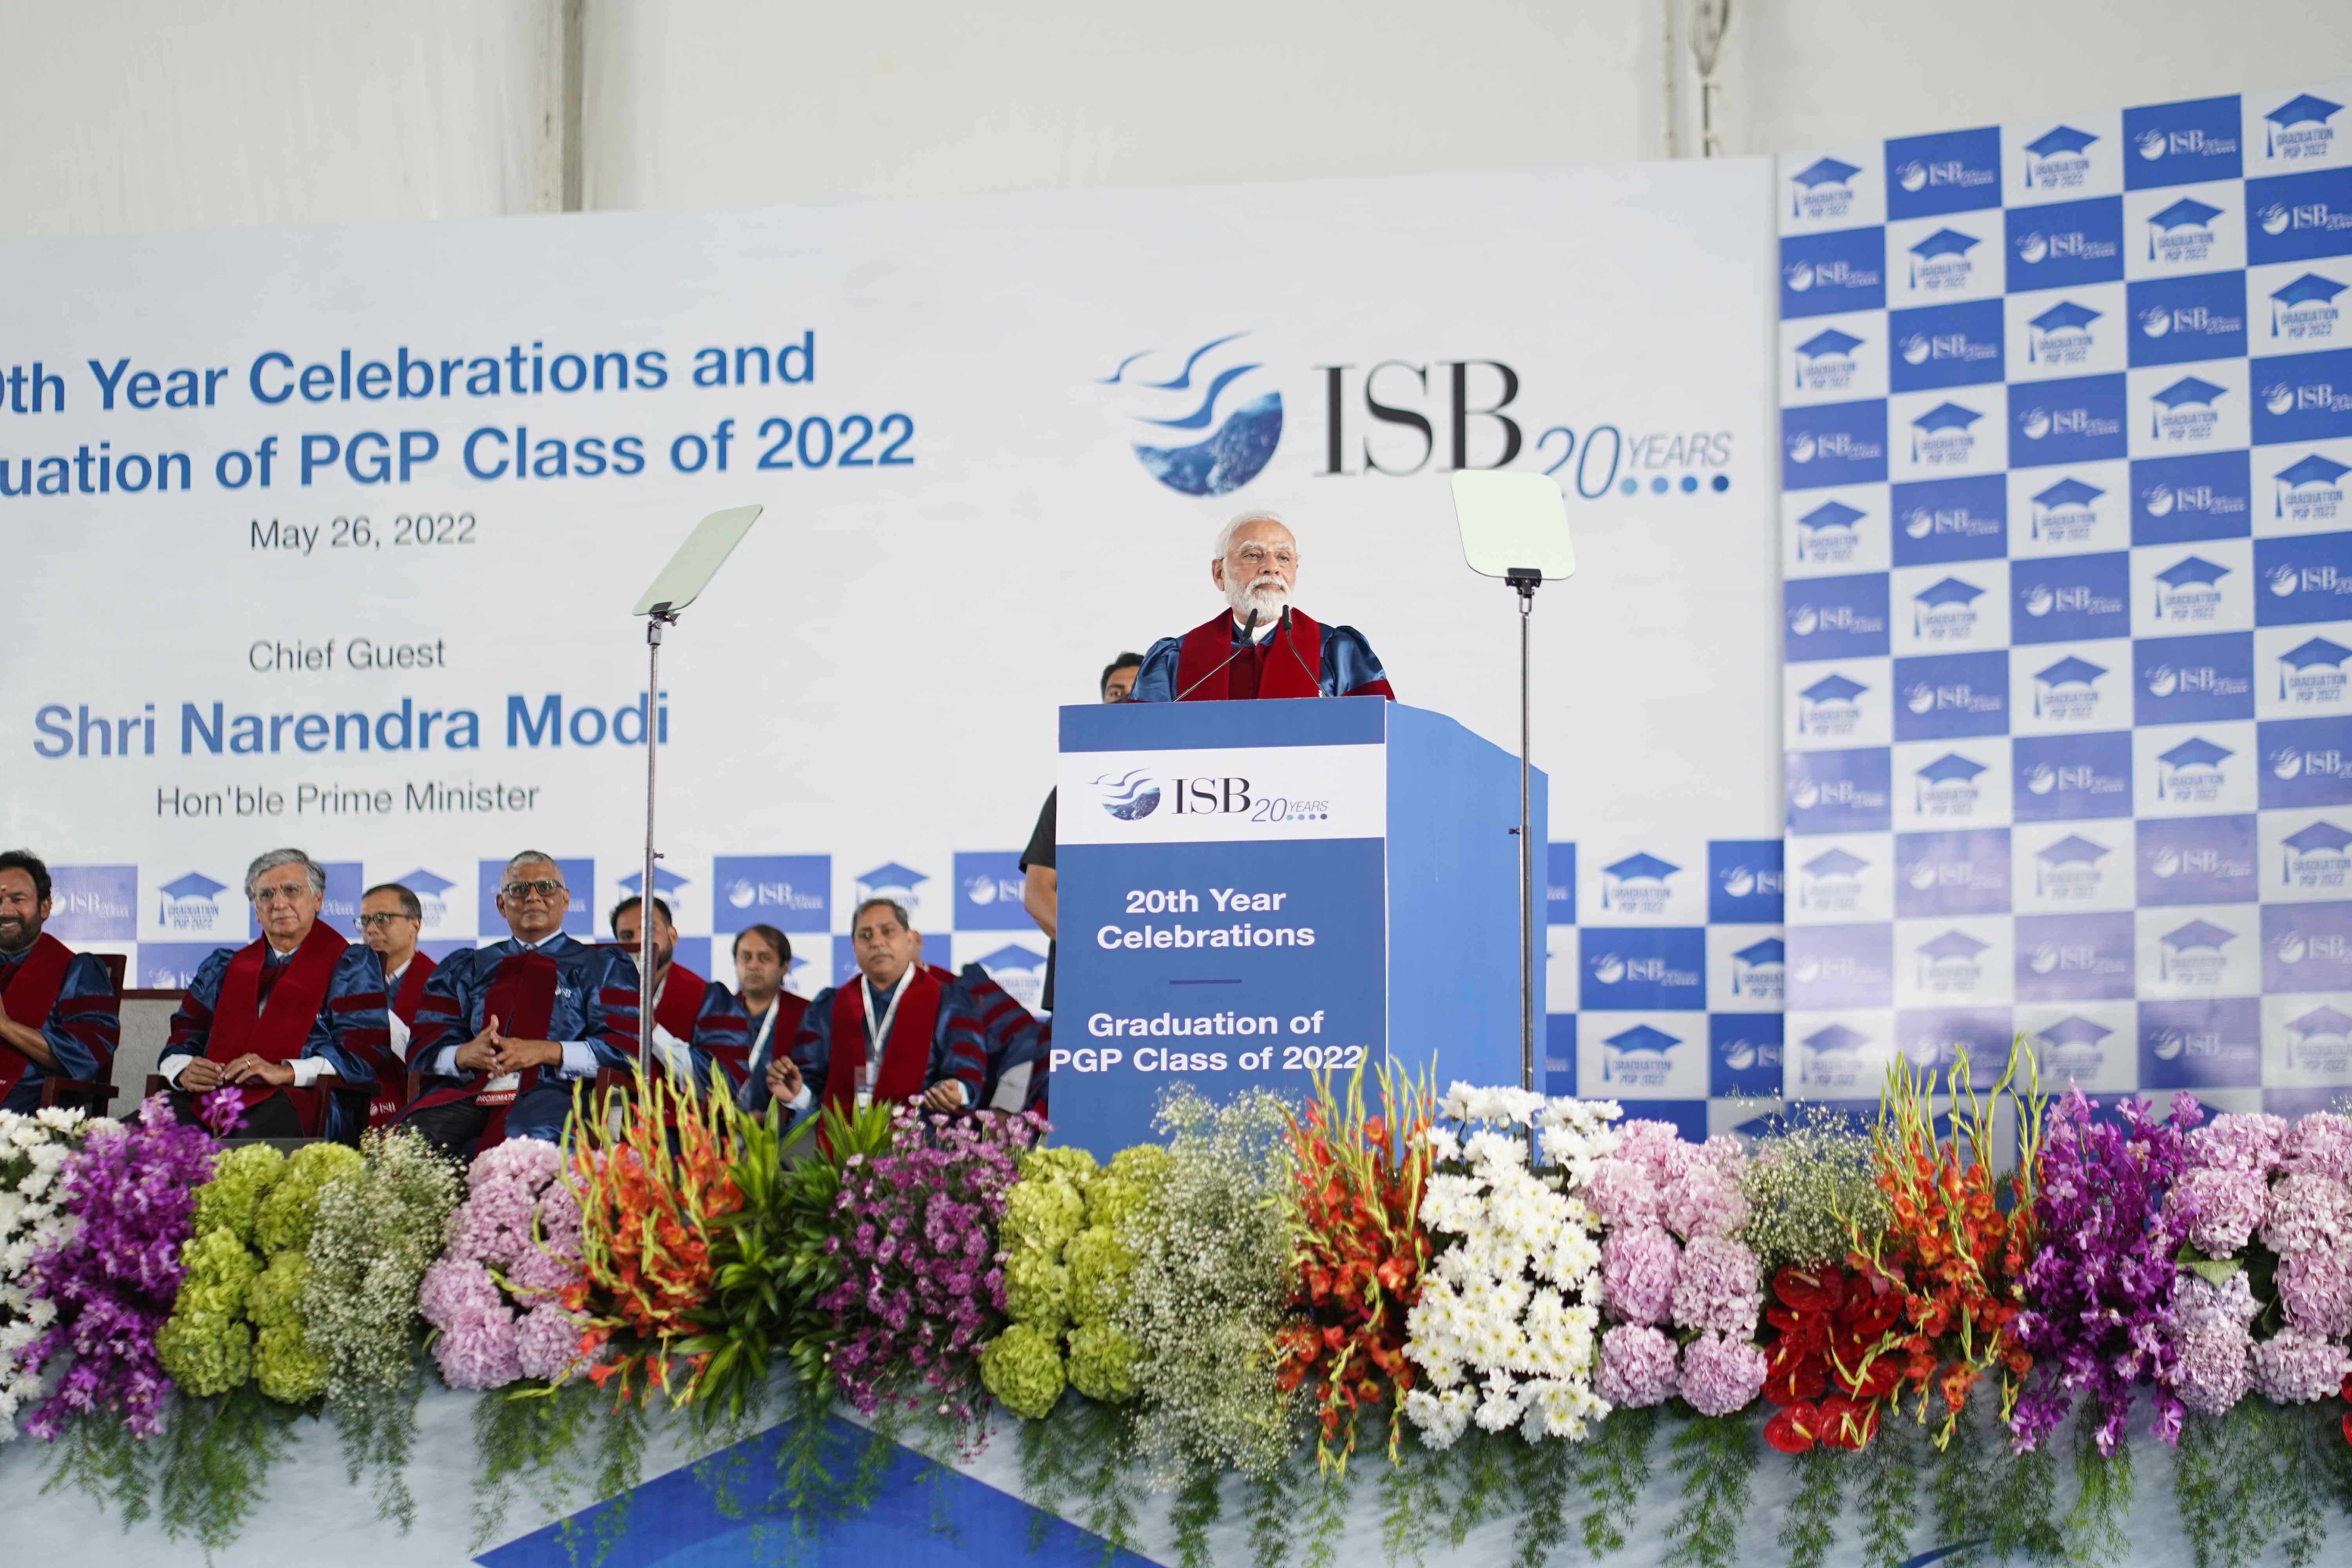 Prime Minister Narendra Modi makes his address to mark the 20th year completion of ISB 